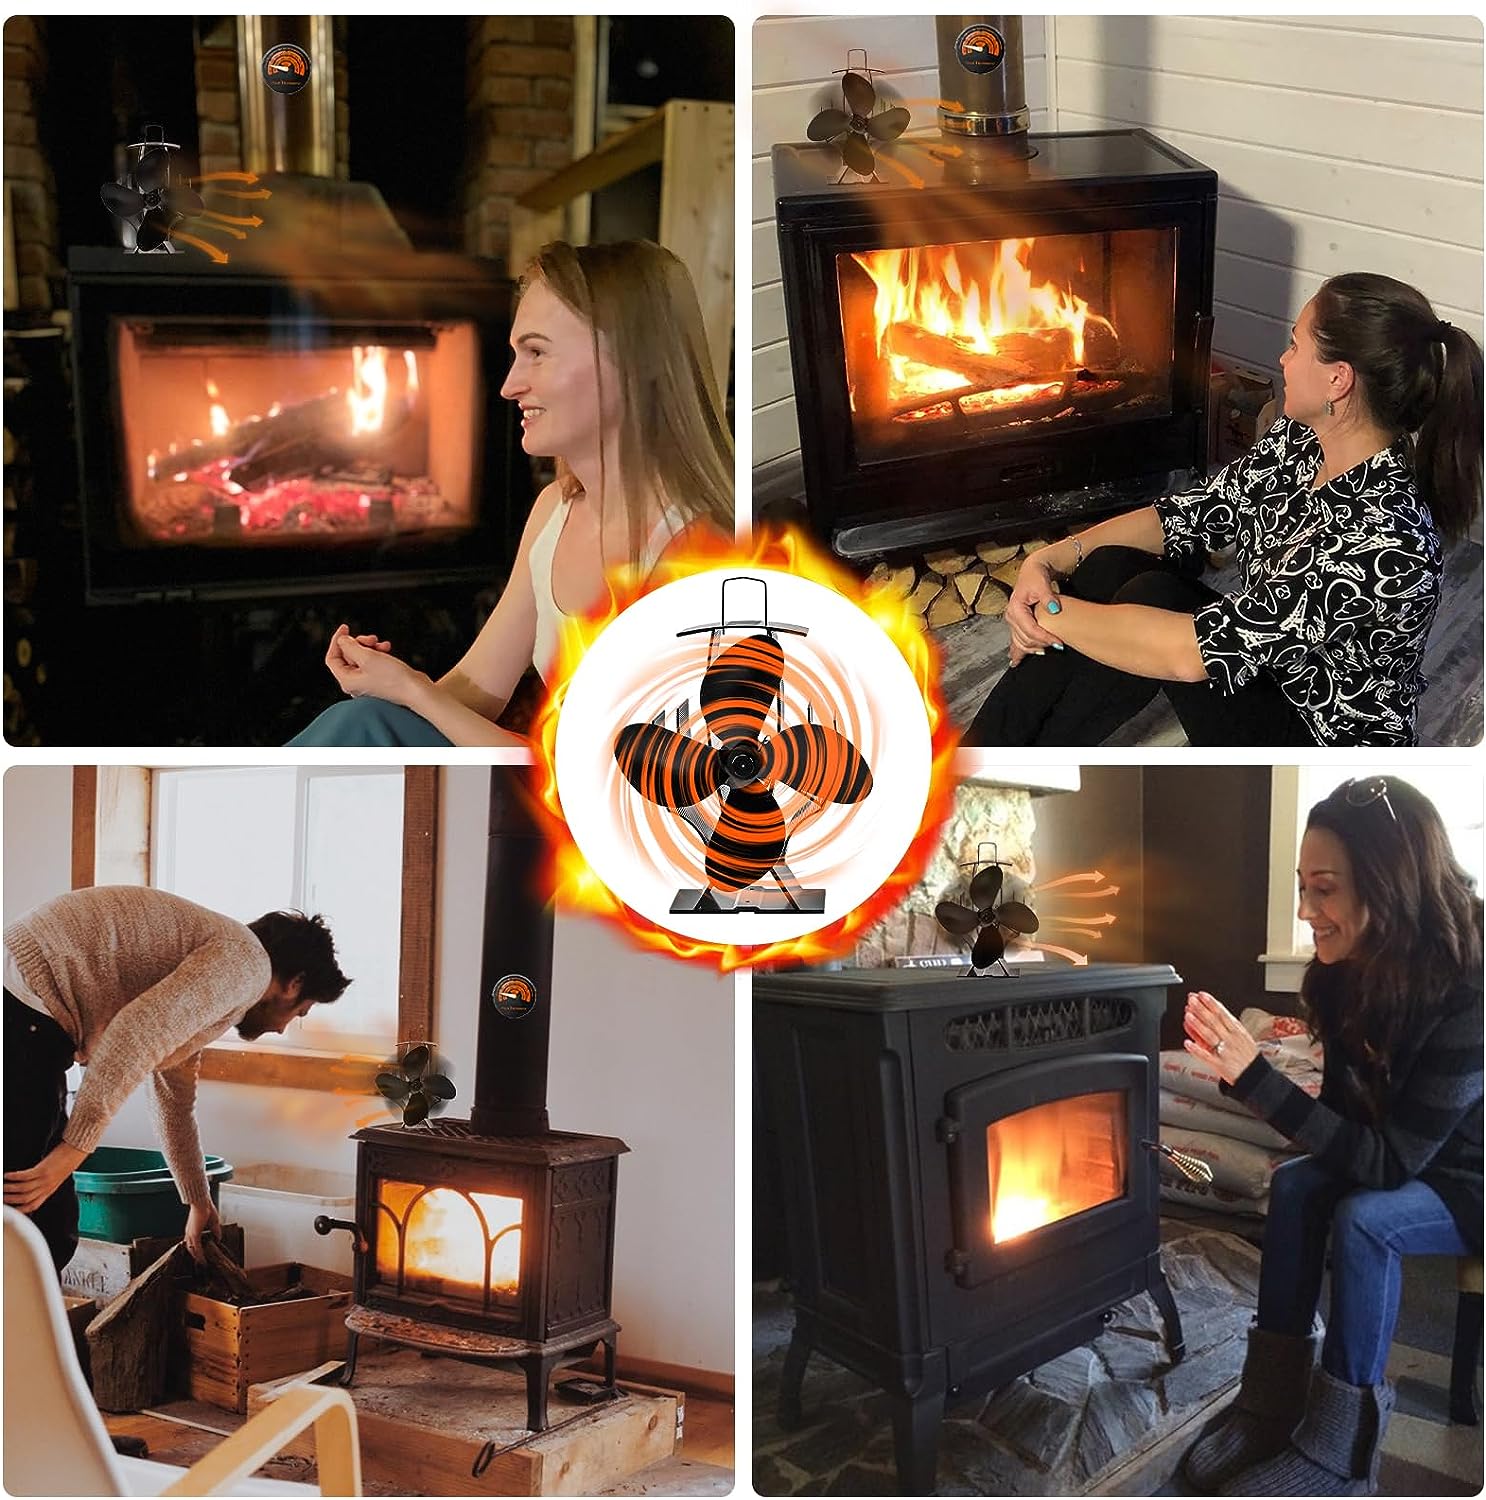 4-Blade Heat Powered Stove Fan- For Wood, Log and Pellet Burners